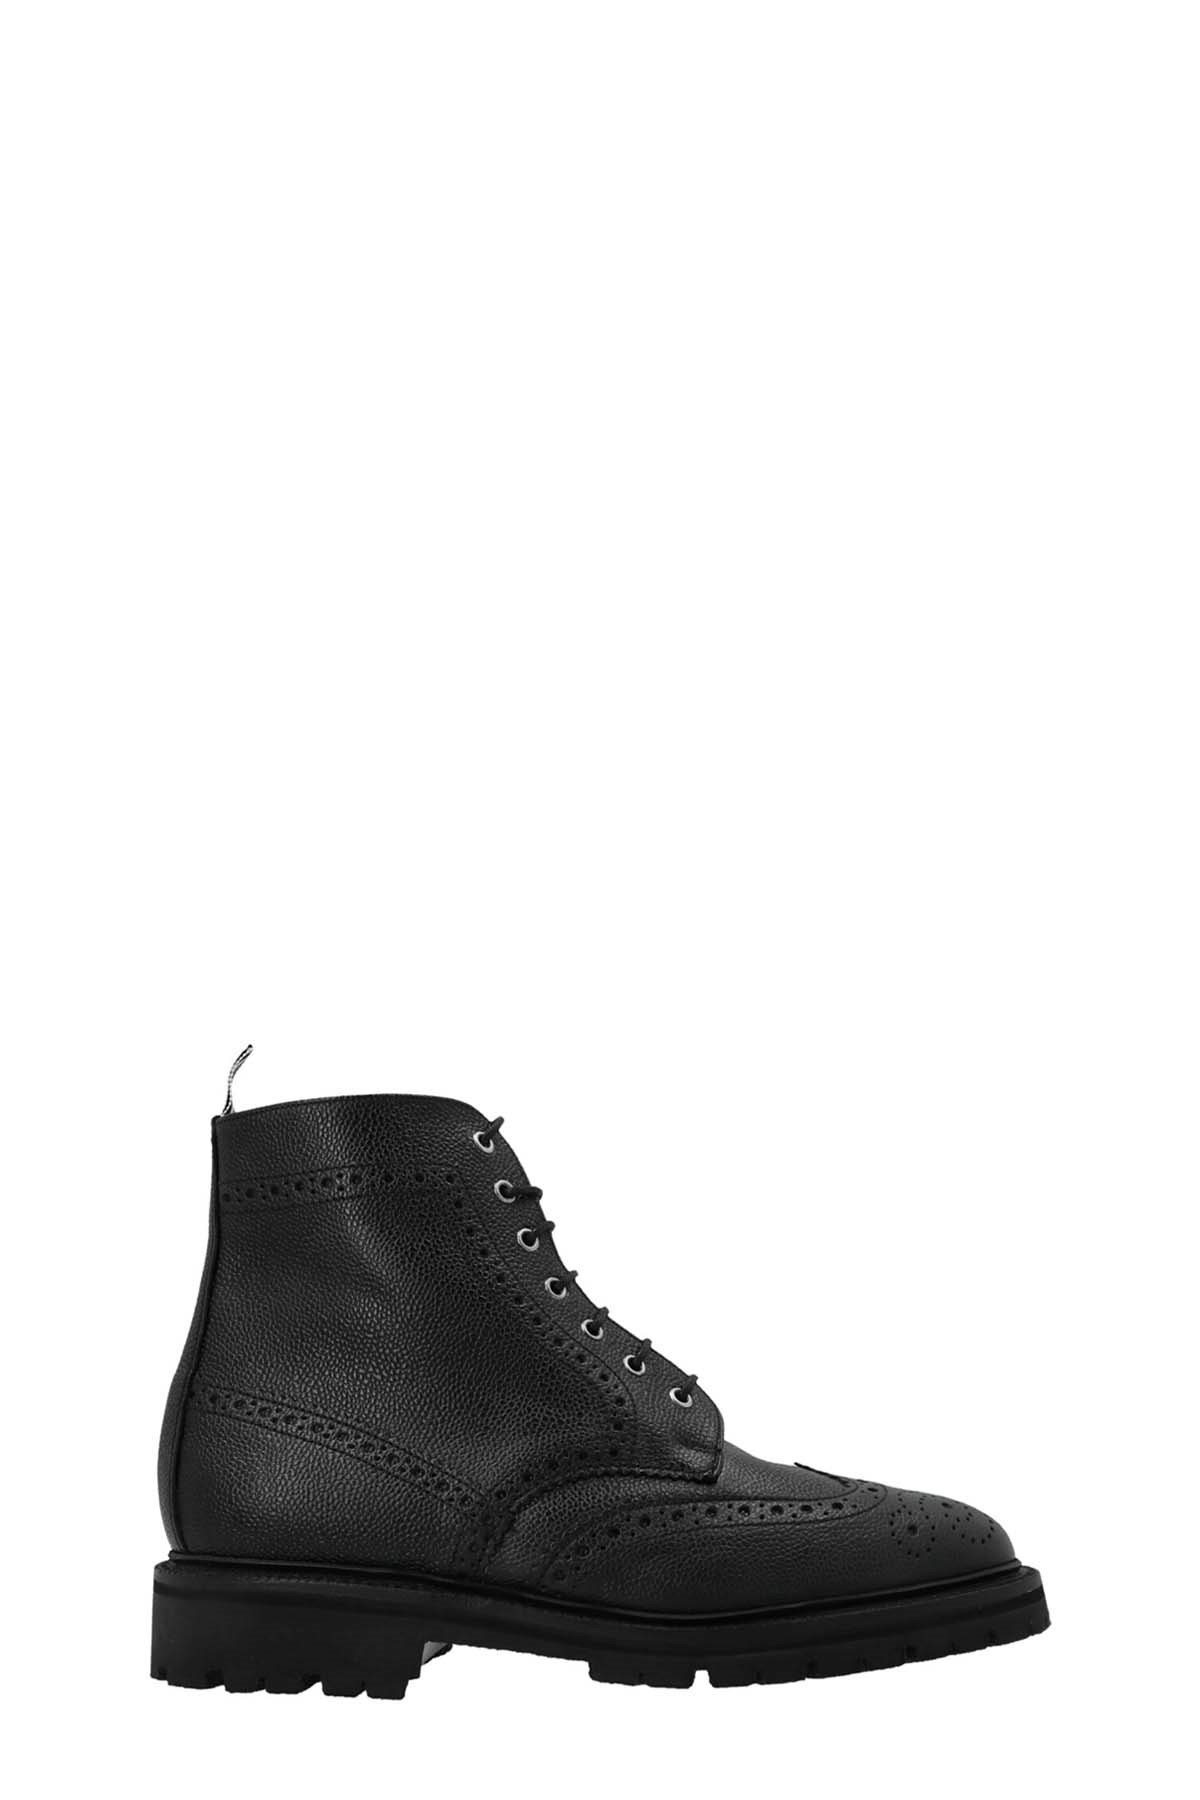 THOM BROWNE 'Commando' Ankle Boots